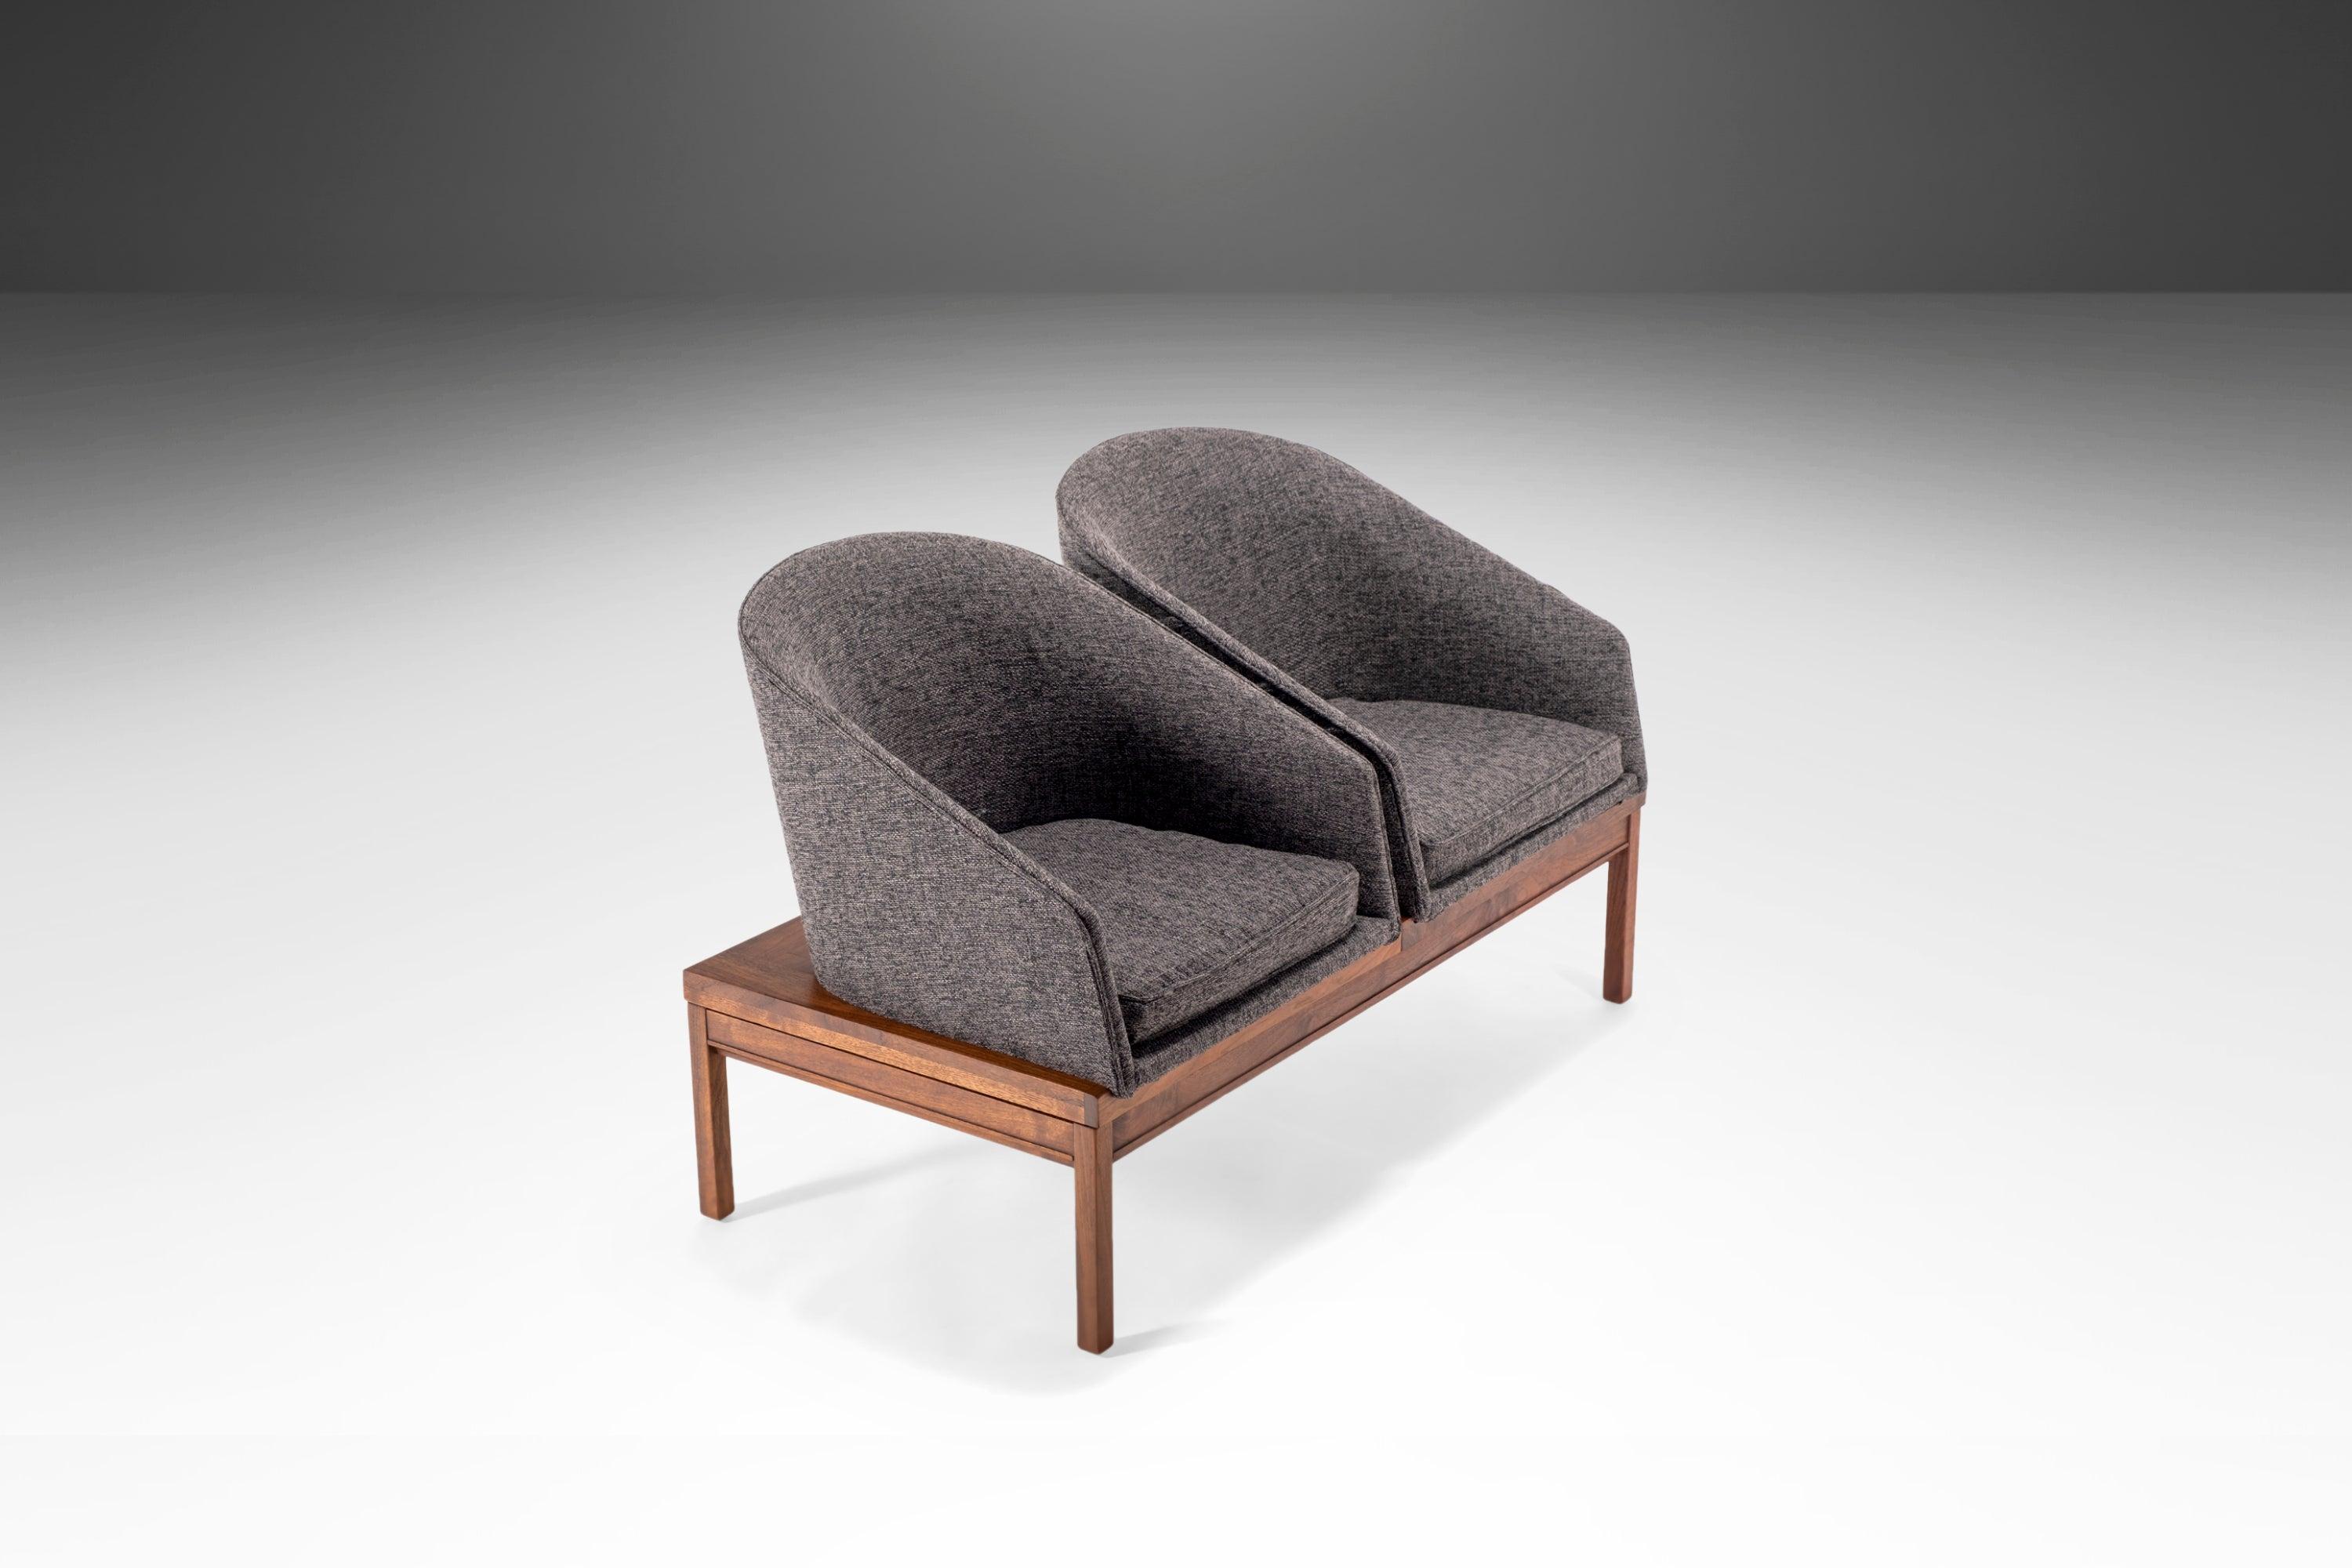 As comfortable as it is aesthetically pleasing this two-seater modular bench, designed by the acclaimed Arthur Umanoff, is newly upholstered and ready for your space. Famous for using natural materials and new methods to reimagine traditional